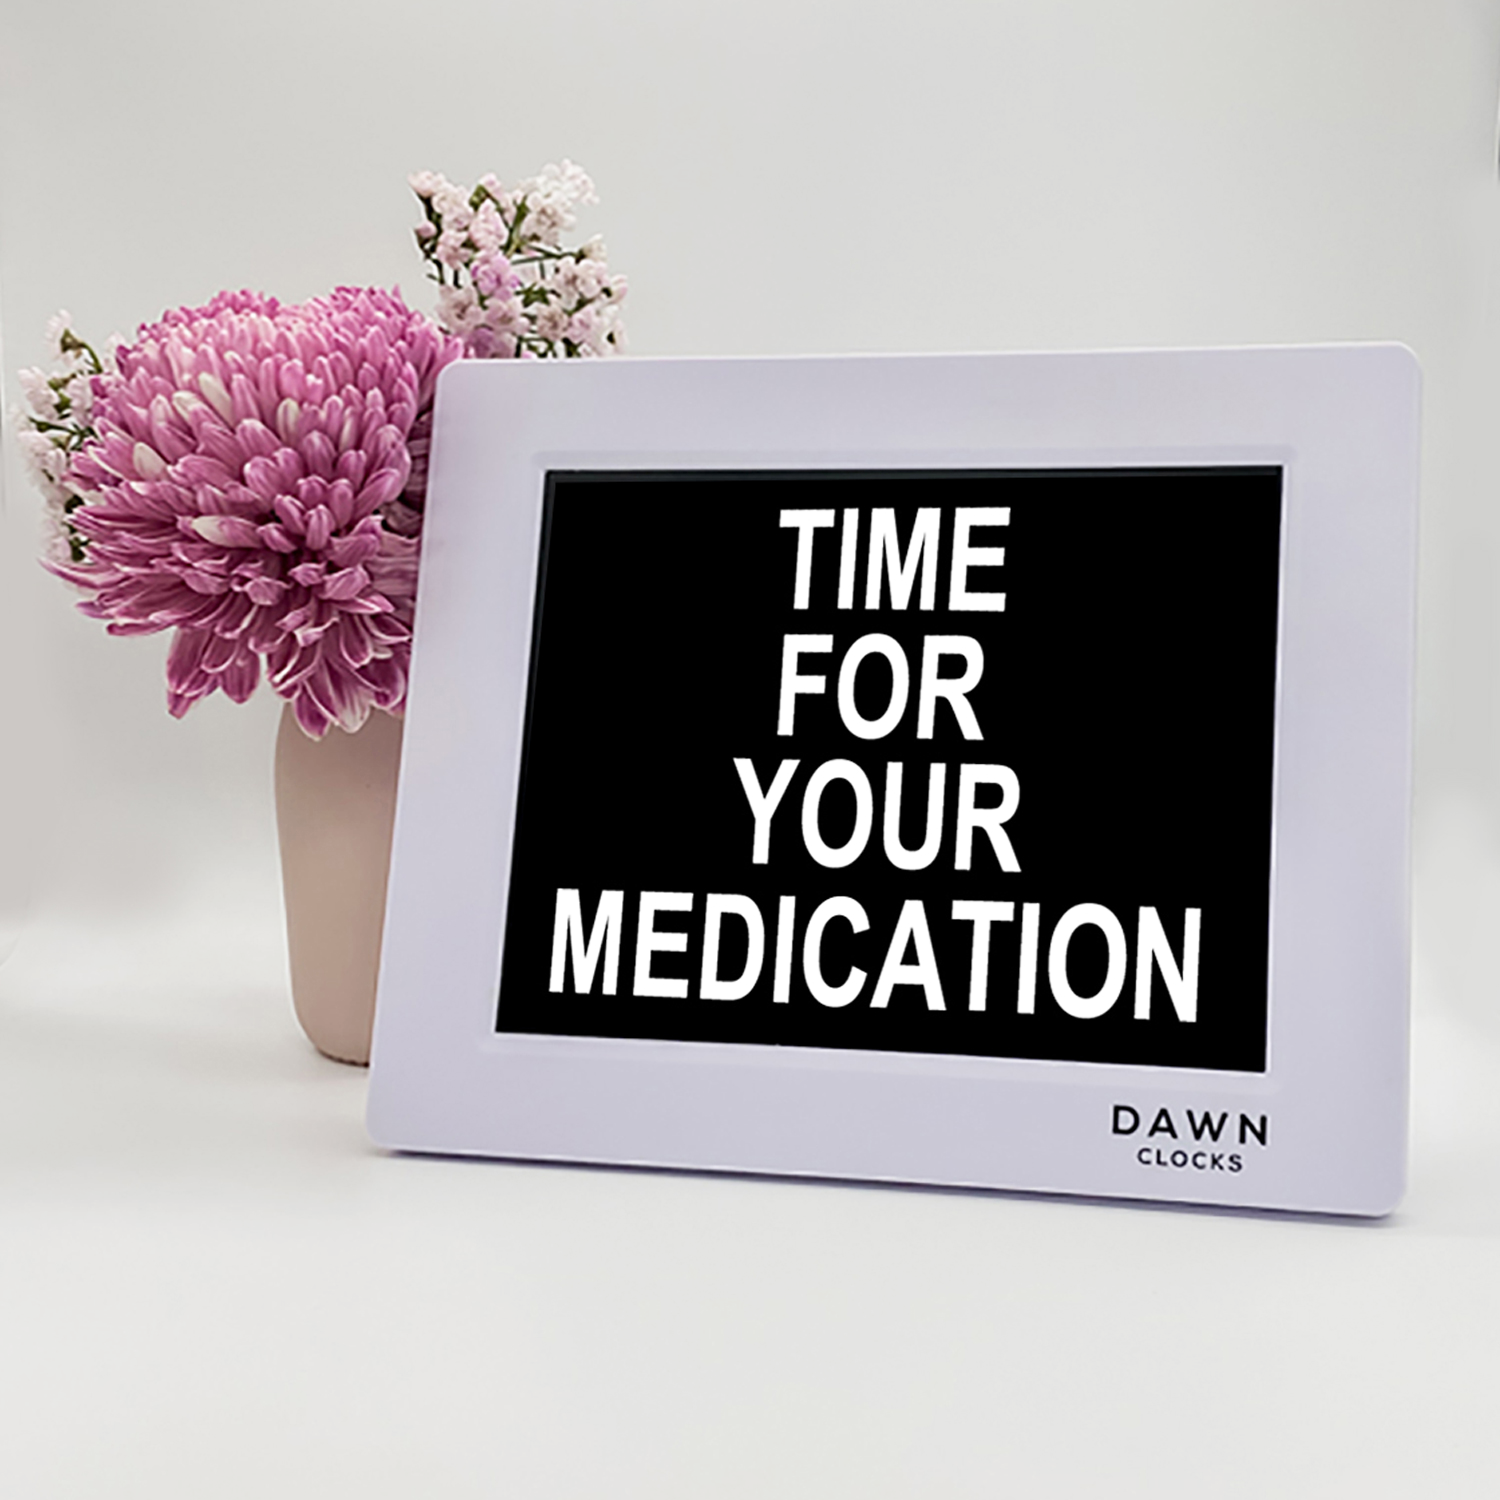 Original Dawn Clock shown on a table with the "Time for your medication" reminder on the screen. This is ideal for all ages and proved essential for NDIS participants, people living with Dementia, people living with a disability and seniors.